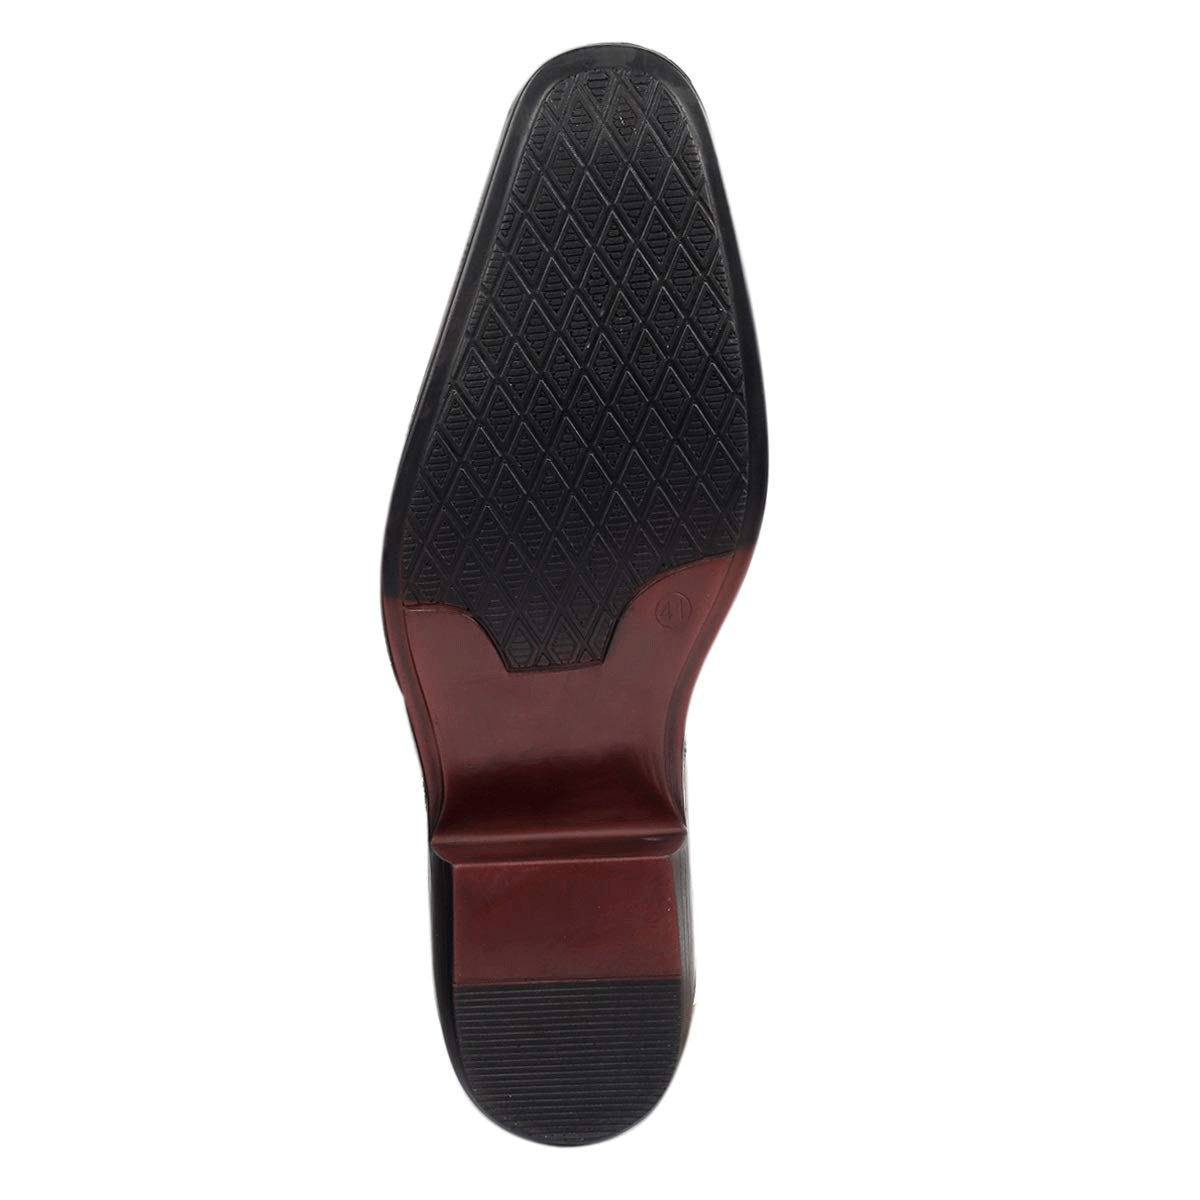 Classy Casual And Formal Black Moccasin Monk Slip-on Shoes For Men-JonasParamount